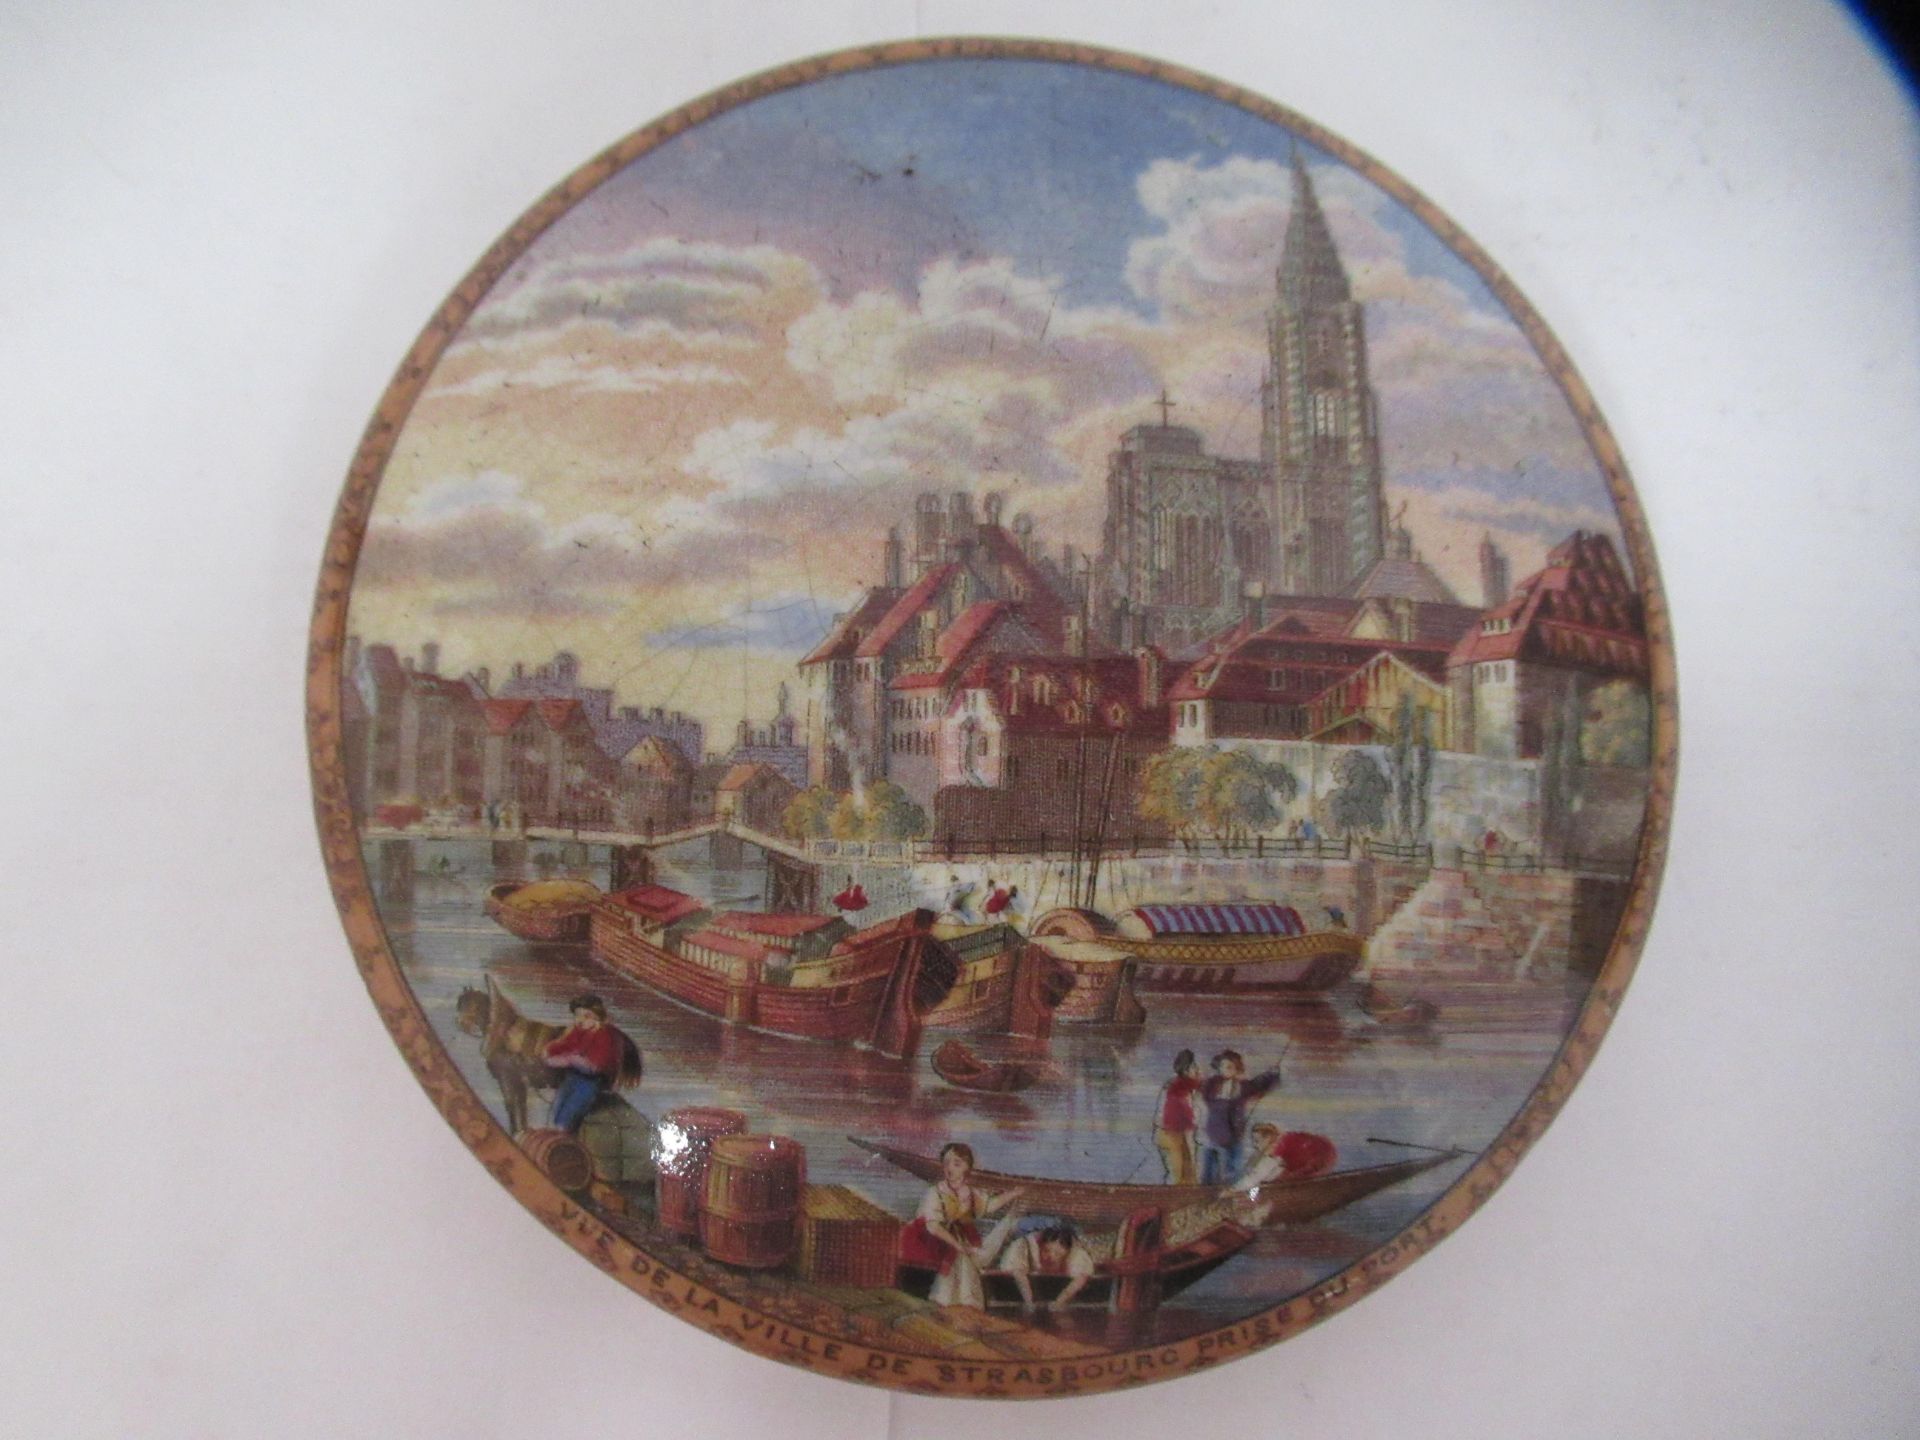 6x Prattware ceramic lids including 'Royal Harbour Ramsgate', 'The Chin-Chew River', 'Contrast', and - Image 11 of 21